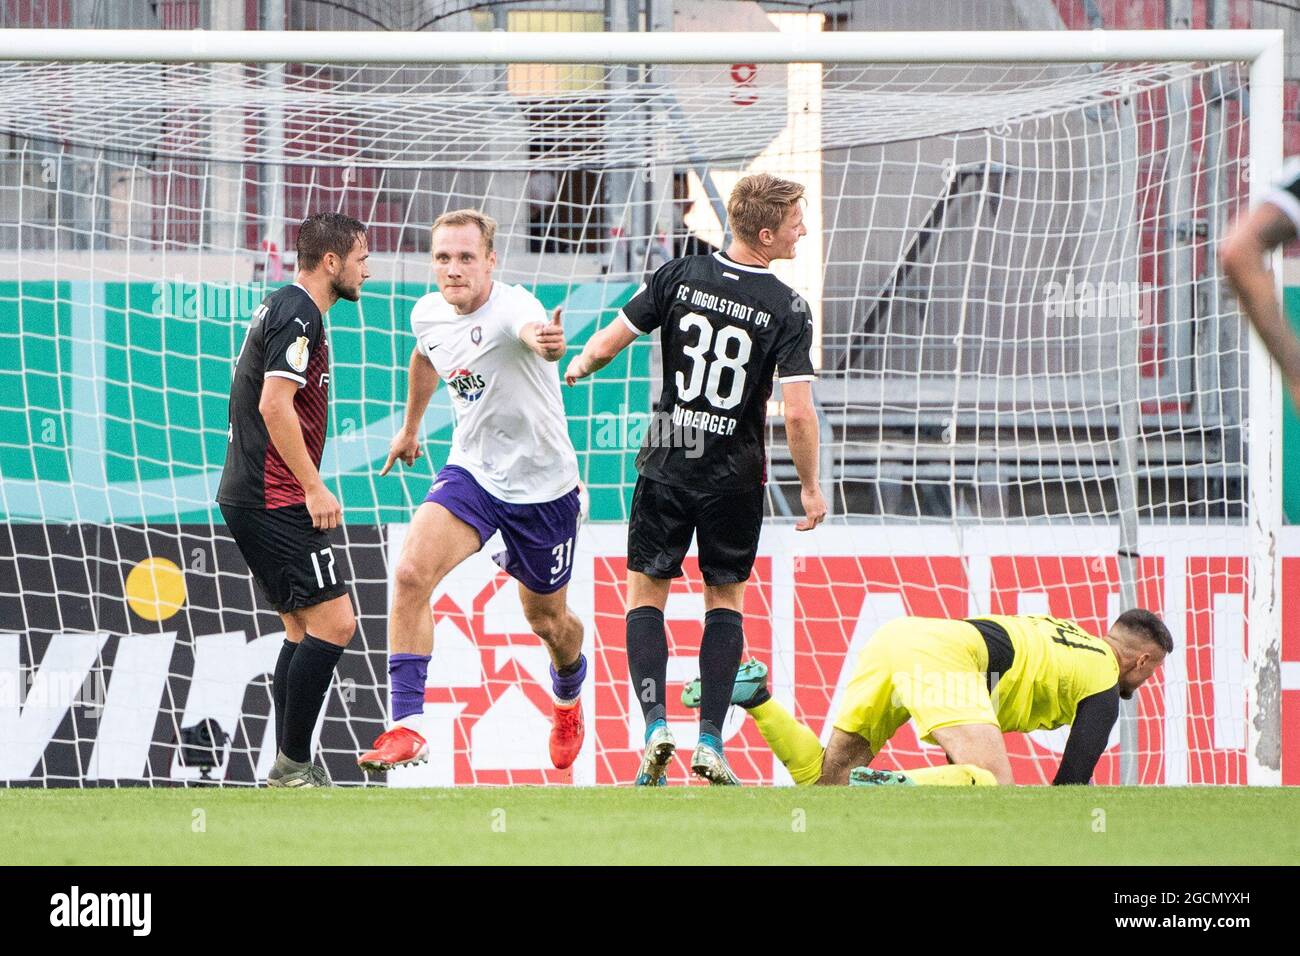 09 August 2021, Bavaria, Ingolstadt: Football: DFB Cup, FC Ingolstadt 04 - Erzgebirge Aue, 1st round at Audi Sportpark. Ben Zolinski of Erzgebirge Aue (2nd from left) celebrates his goal to make it 1:1, while goalkeeper Fabijan Buntic of Ingolstadt (r) kneels behind him. Next to him are Michael Heinloth (l) and Maximilian Neuberger (2nd from right) of Ingolstadt. (Important note: The DFB prohibits the use of sequence pictures on the internet and in online media during the match (including half-time). Restriction period! The DFB allows the publication and further use of the images on mobile dev Stock Photo